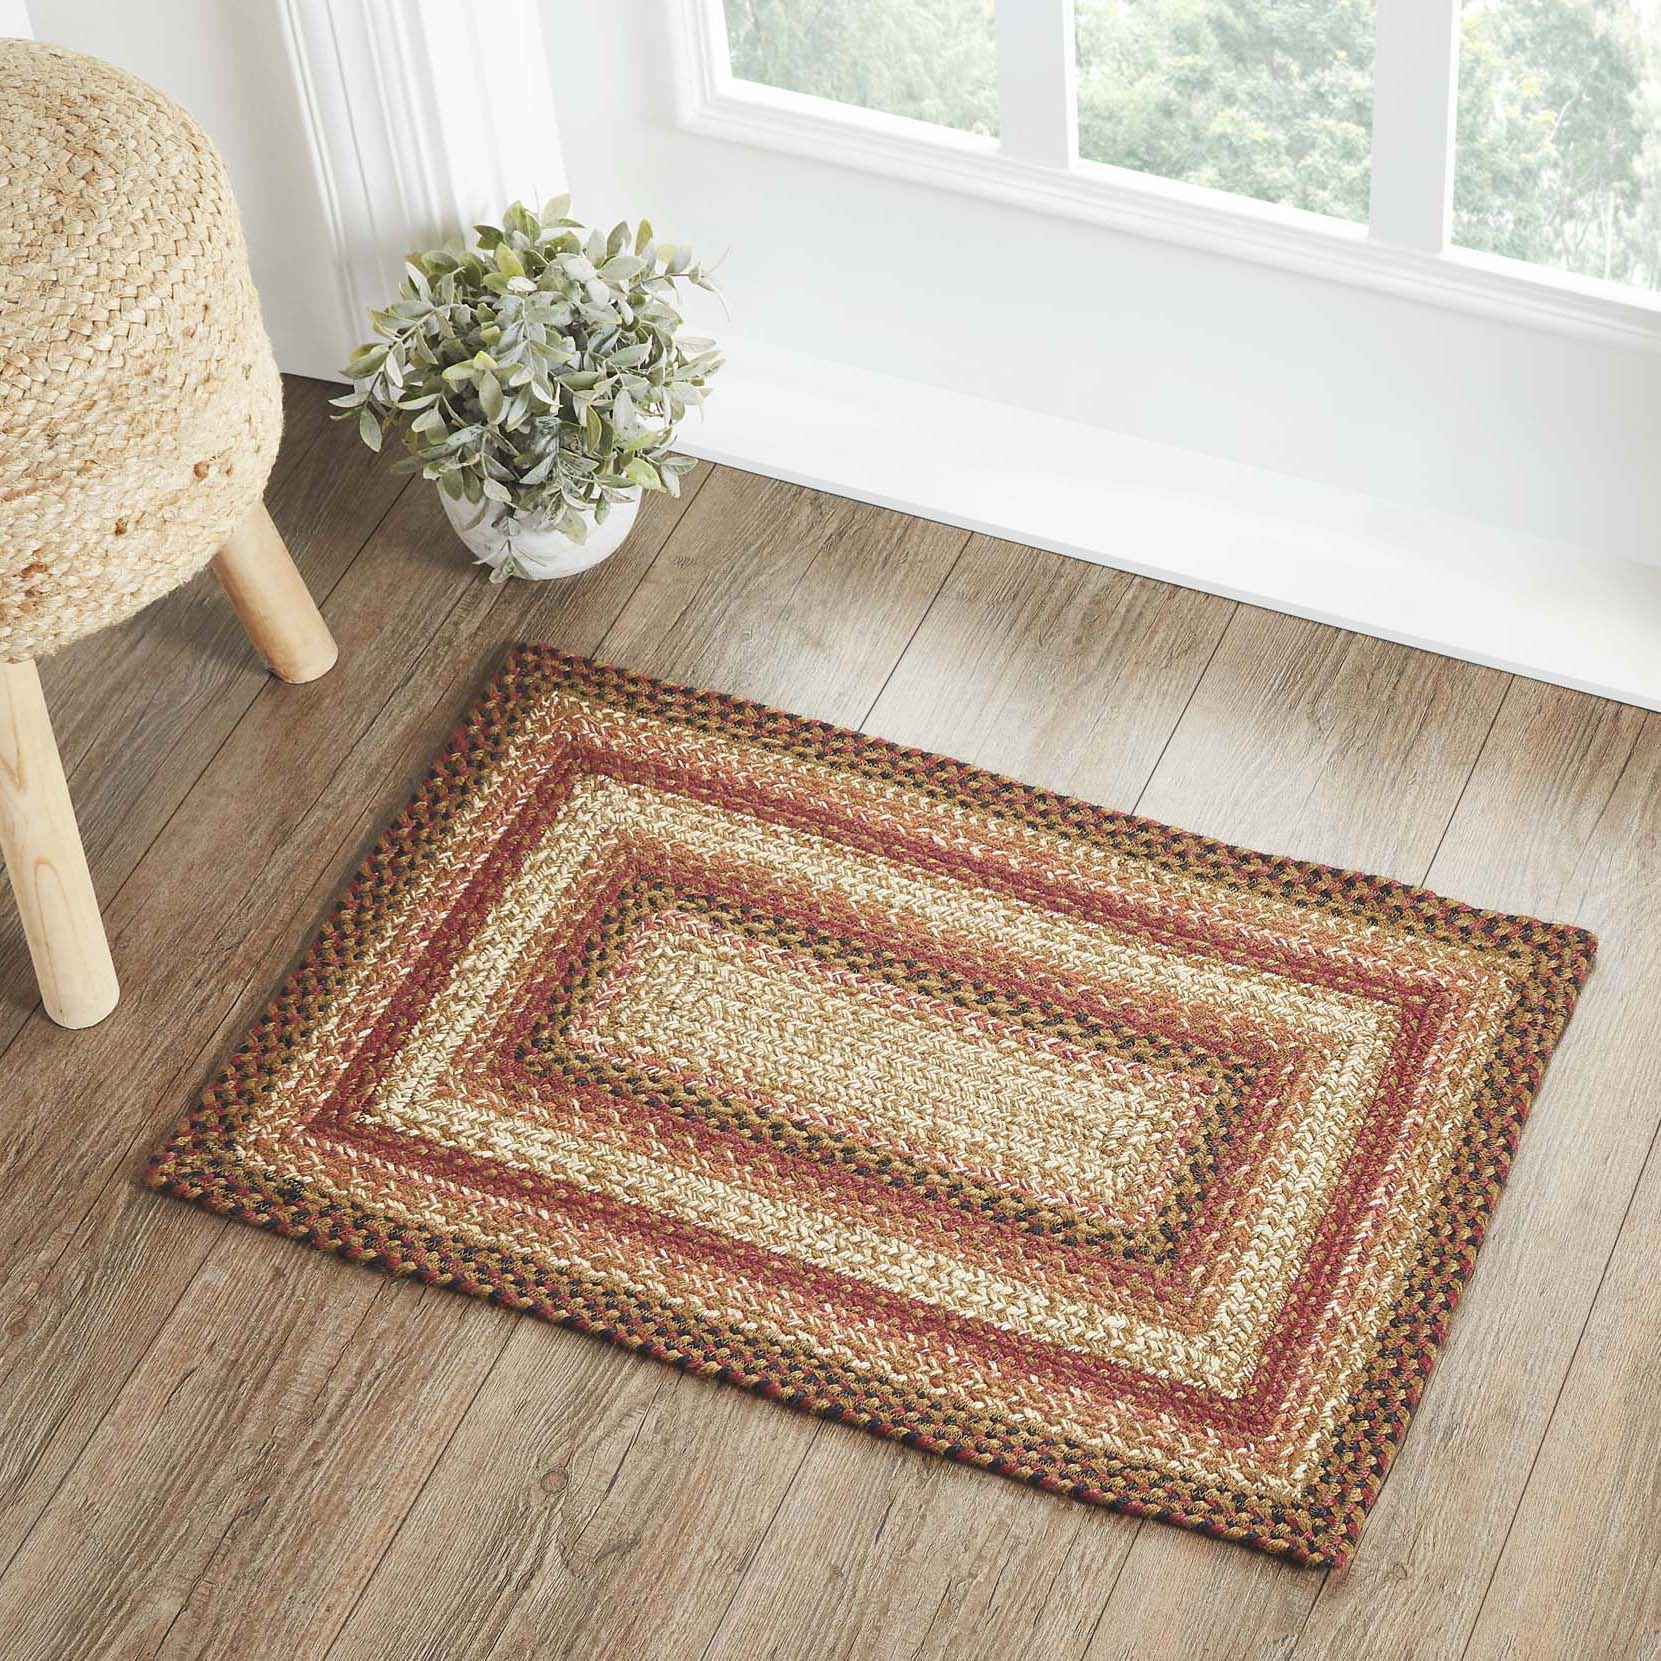 Ginger Spice Jute Braided Rug Rect with Rug Pad 20"x30" VHC Brands